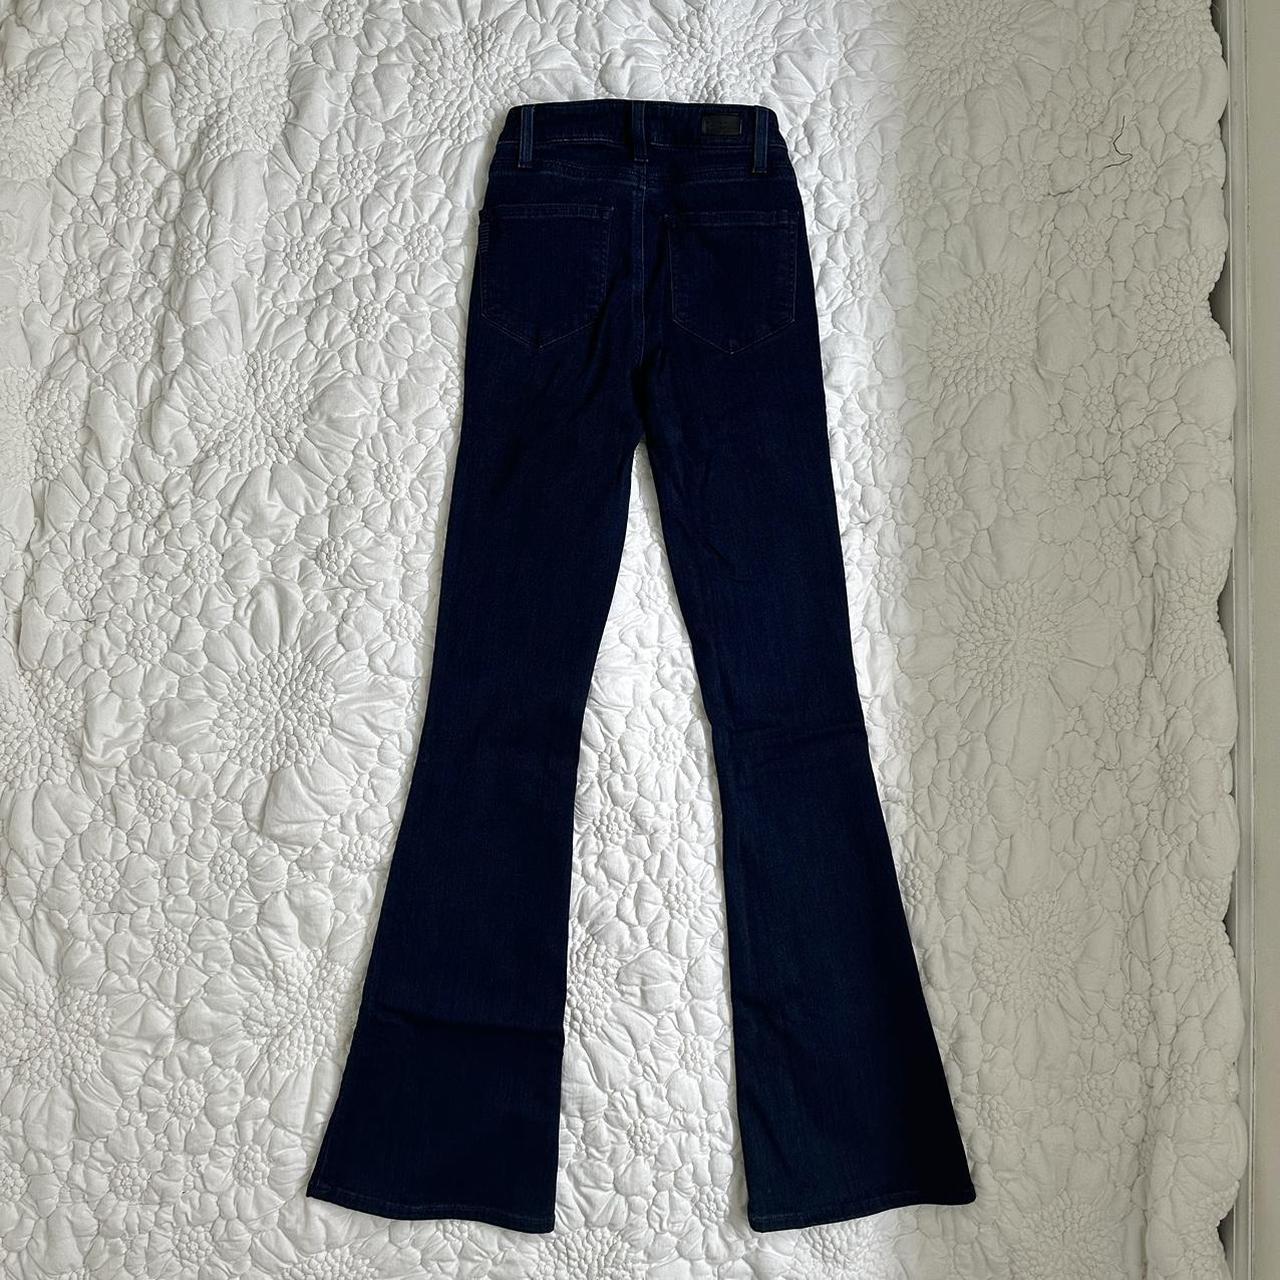 Paige high rise bell canyon jeans ~ dark wash - Depop